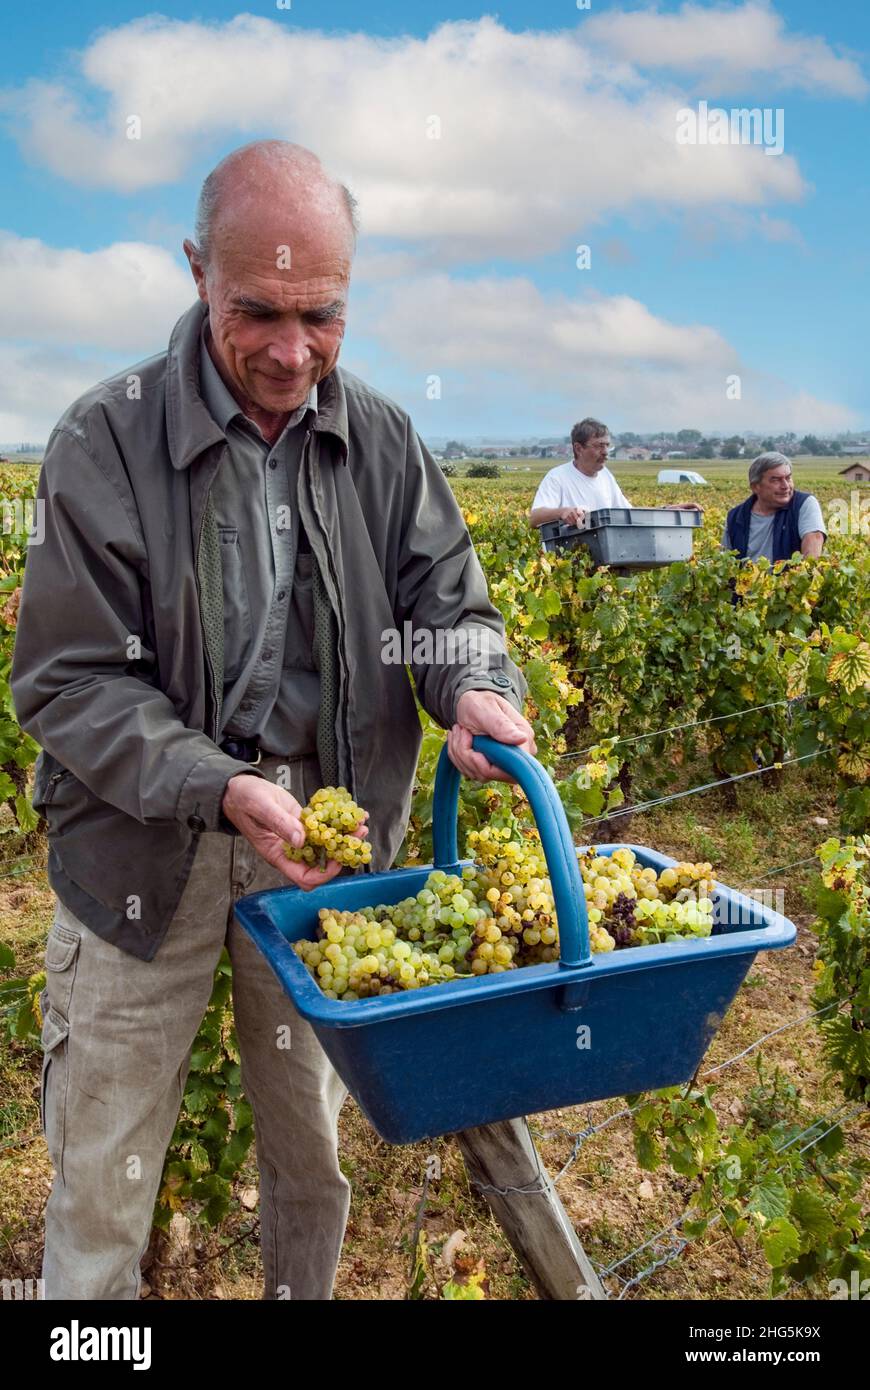 LE MONTRACHET Aubert de Villaine DRC with a pannier of harvested Grand Cru Chardonnay grapes in the Domaine de la Romanee-Conti parcel of Le Montrachet vineyard, Chassagne-Montrachet, Cote d'Or, France (considered by many to be the finest Chardonnay vineyard in the world) Stock Photo